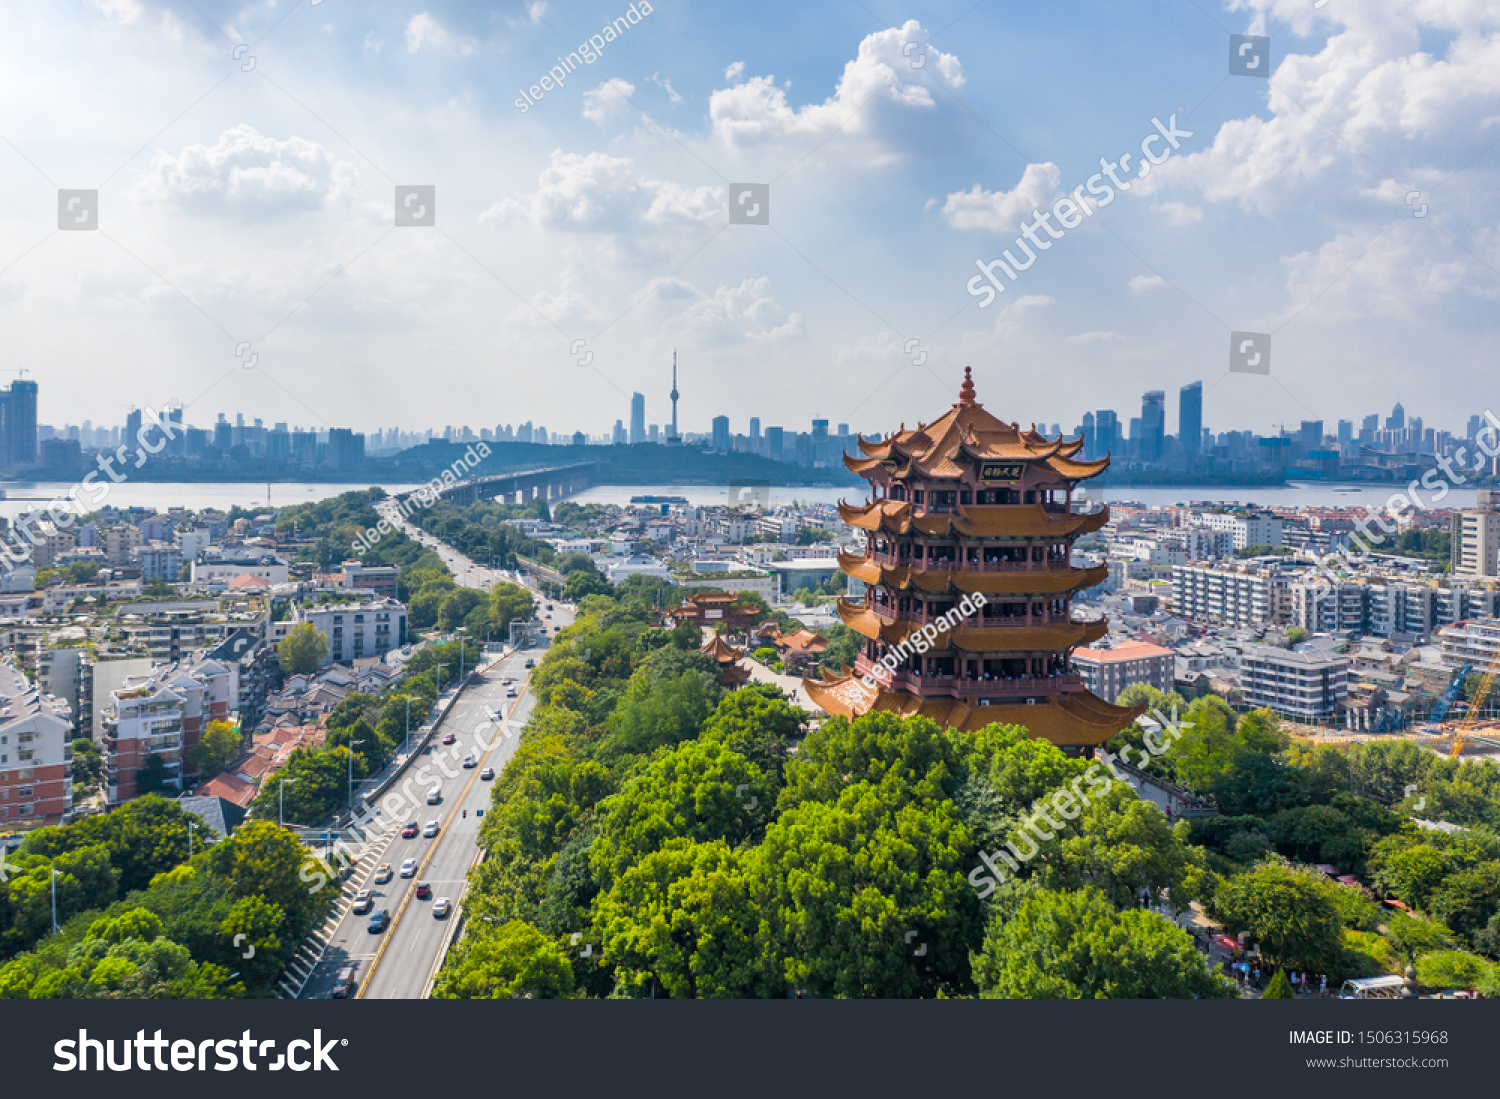 Aerial view of  Wuhan city .The yellow crane tower , located on snake hill in Wuhan, is one of the three famous towers south of yangtze river,China. #1506315968